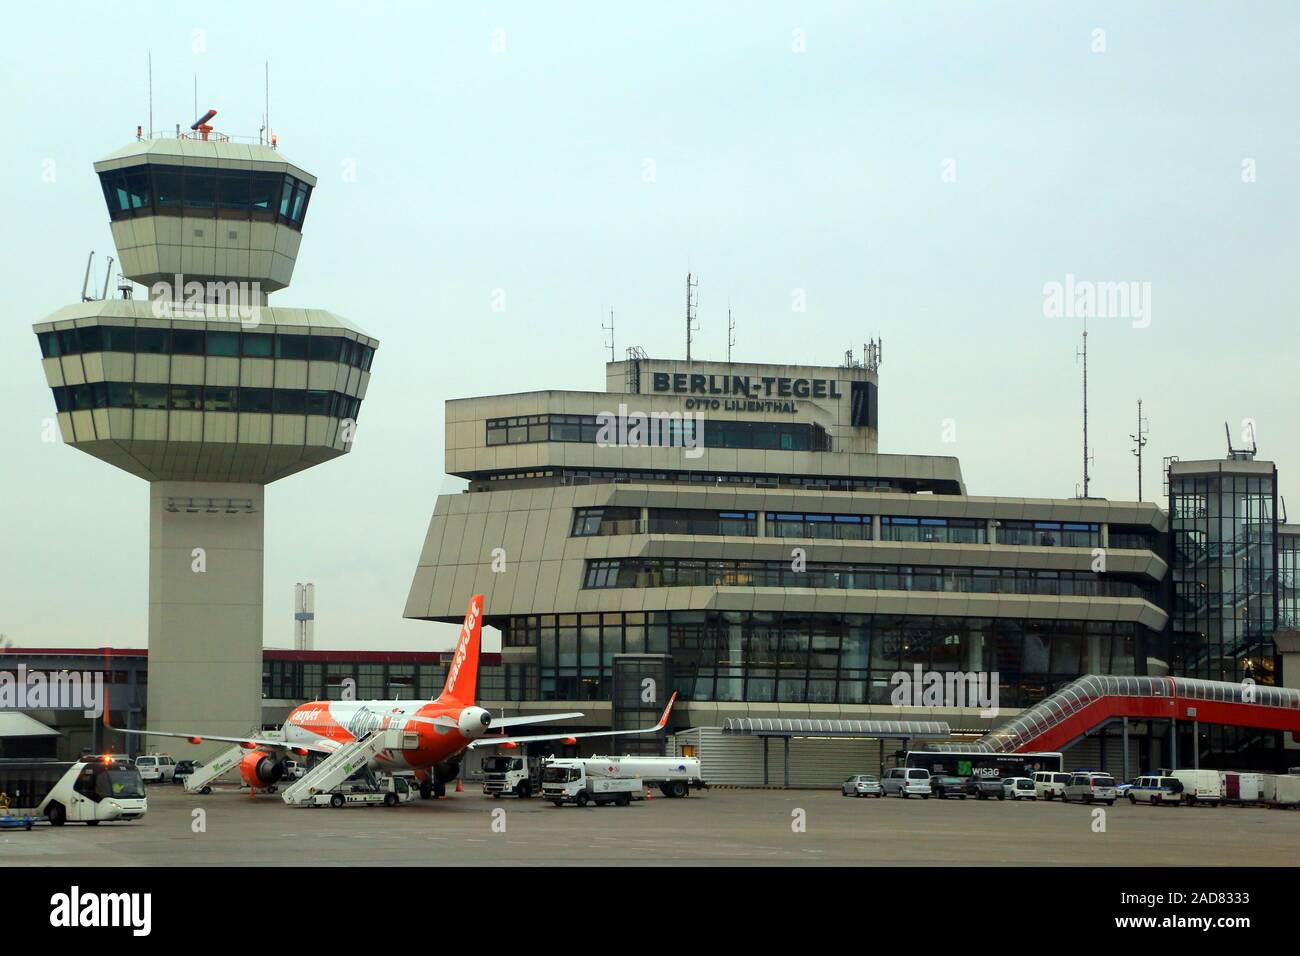 Berlin, Tegel Airport, Otto Lilienthal Stock Photo